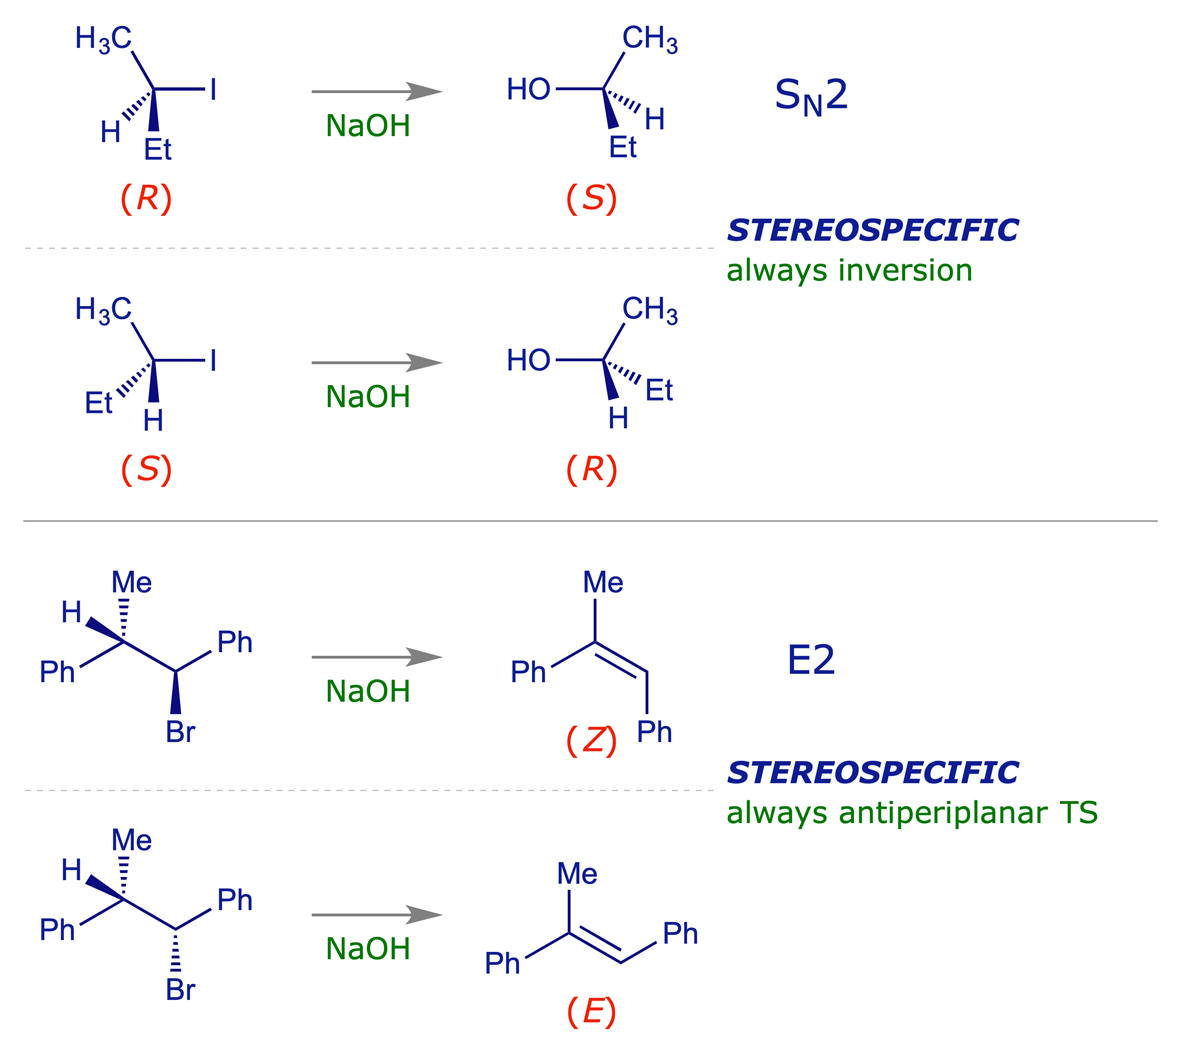 Stereospecific S<sub>N</sub>2 and E2 reaction schemes